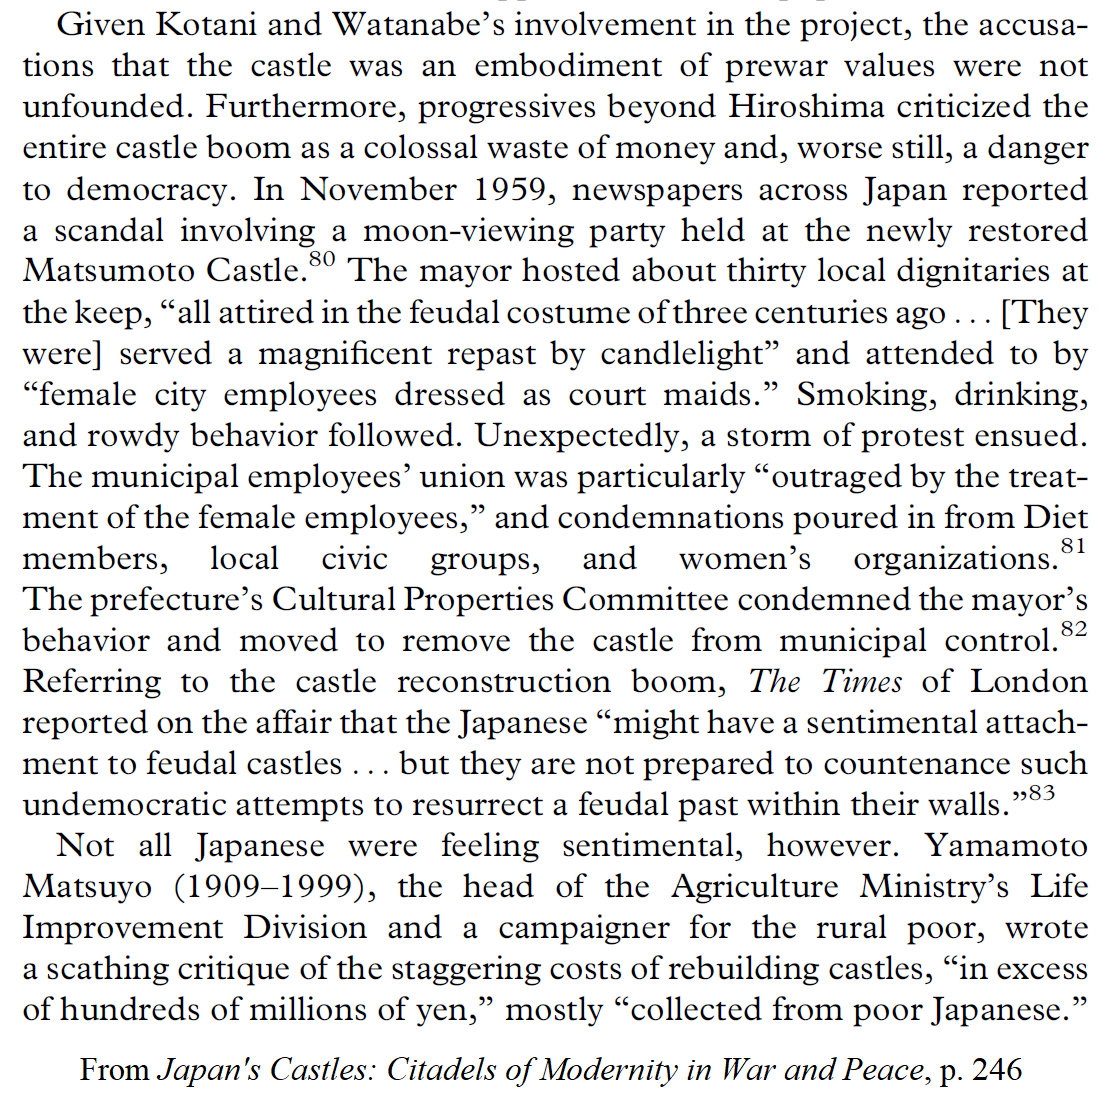 "...the accusations that [the reconstructed Hiroshima C]astle was an embodiment of prewar values were not unfounded. Furthermore, progressives beyond Hiroshima criticized the entire castle boom as a colossal waste of money and, worse still, a danger to democracy." 5/19